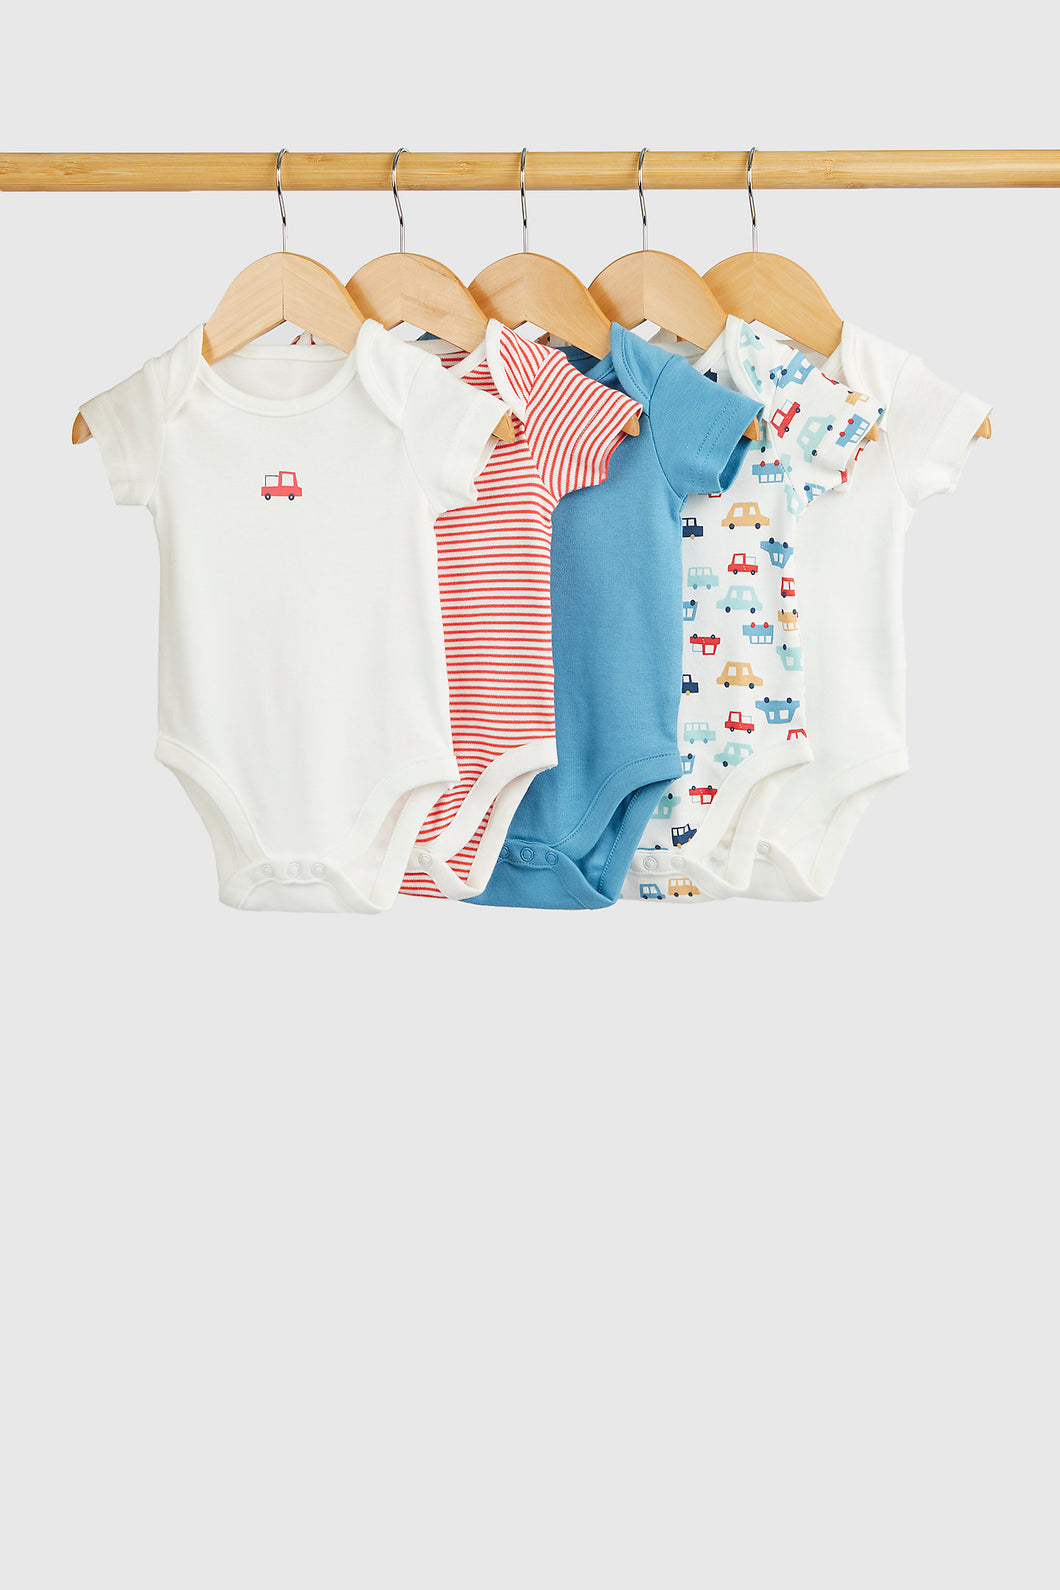 Mothercare Cars Short-Sleeved Bodysuits - 5 Pack